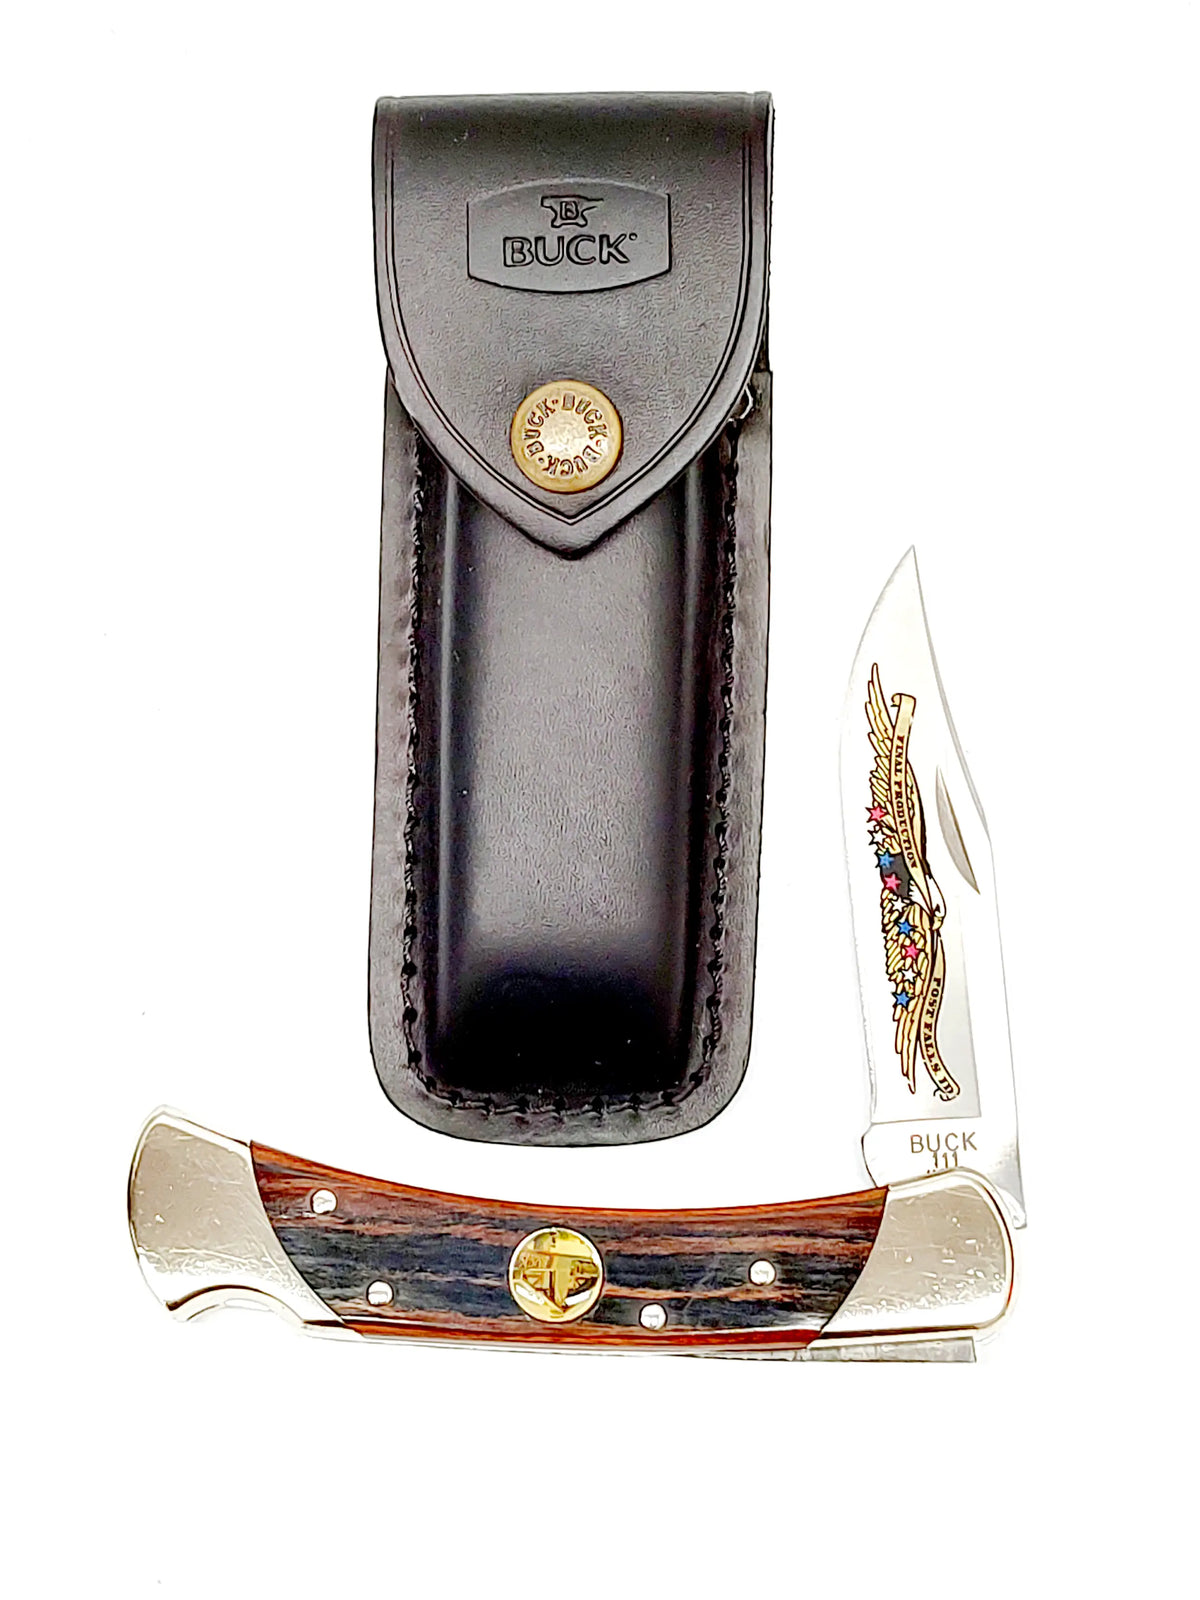 Buck 111 Final Production Post Falls Pocket Knife with Sheath - Hers and His Treasures